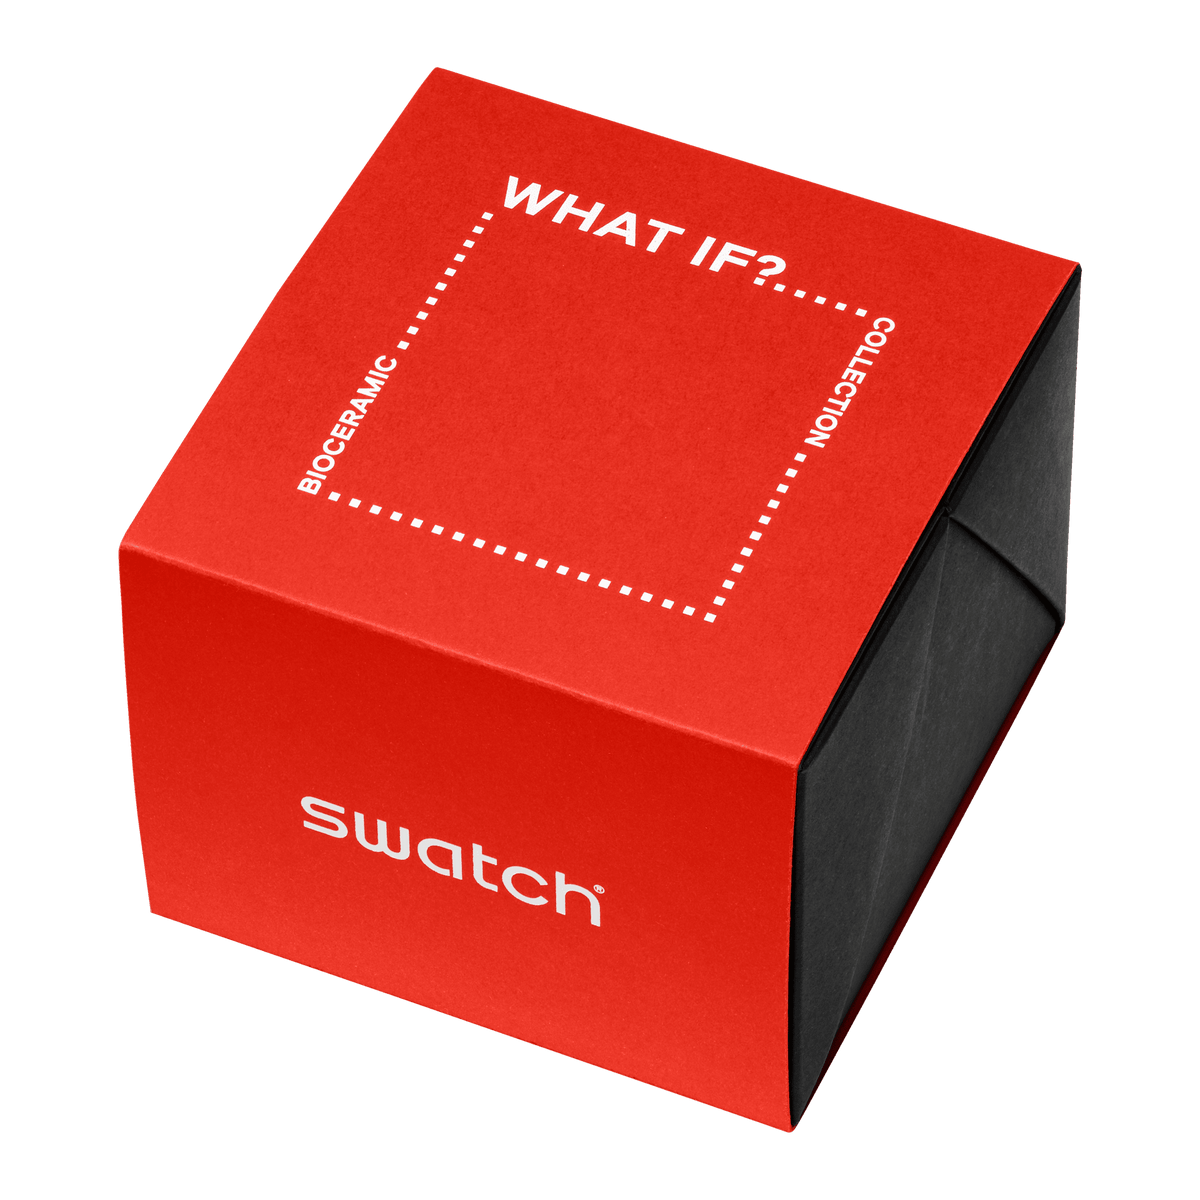 Swatch Watch - What if... Black?